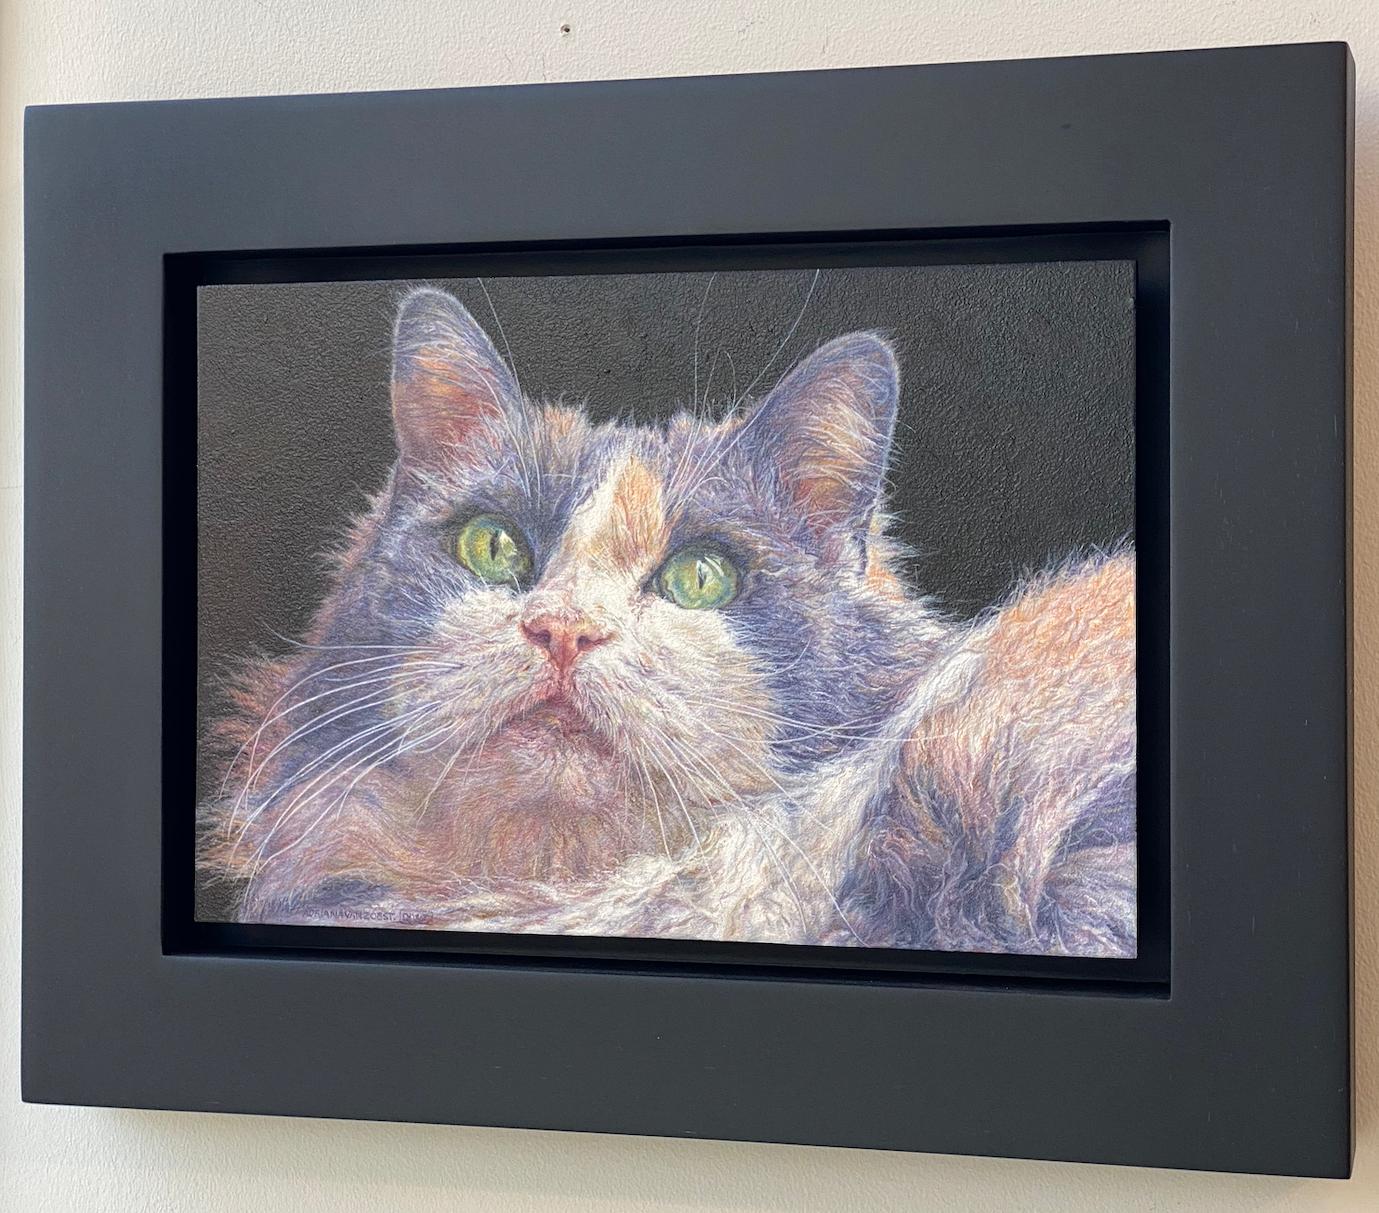 Belle- 21st Century Contemporary Dutch Portraitpainting of a Cat - Painting by Adriana van Zoest